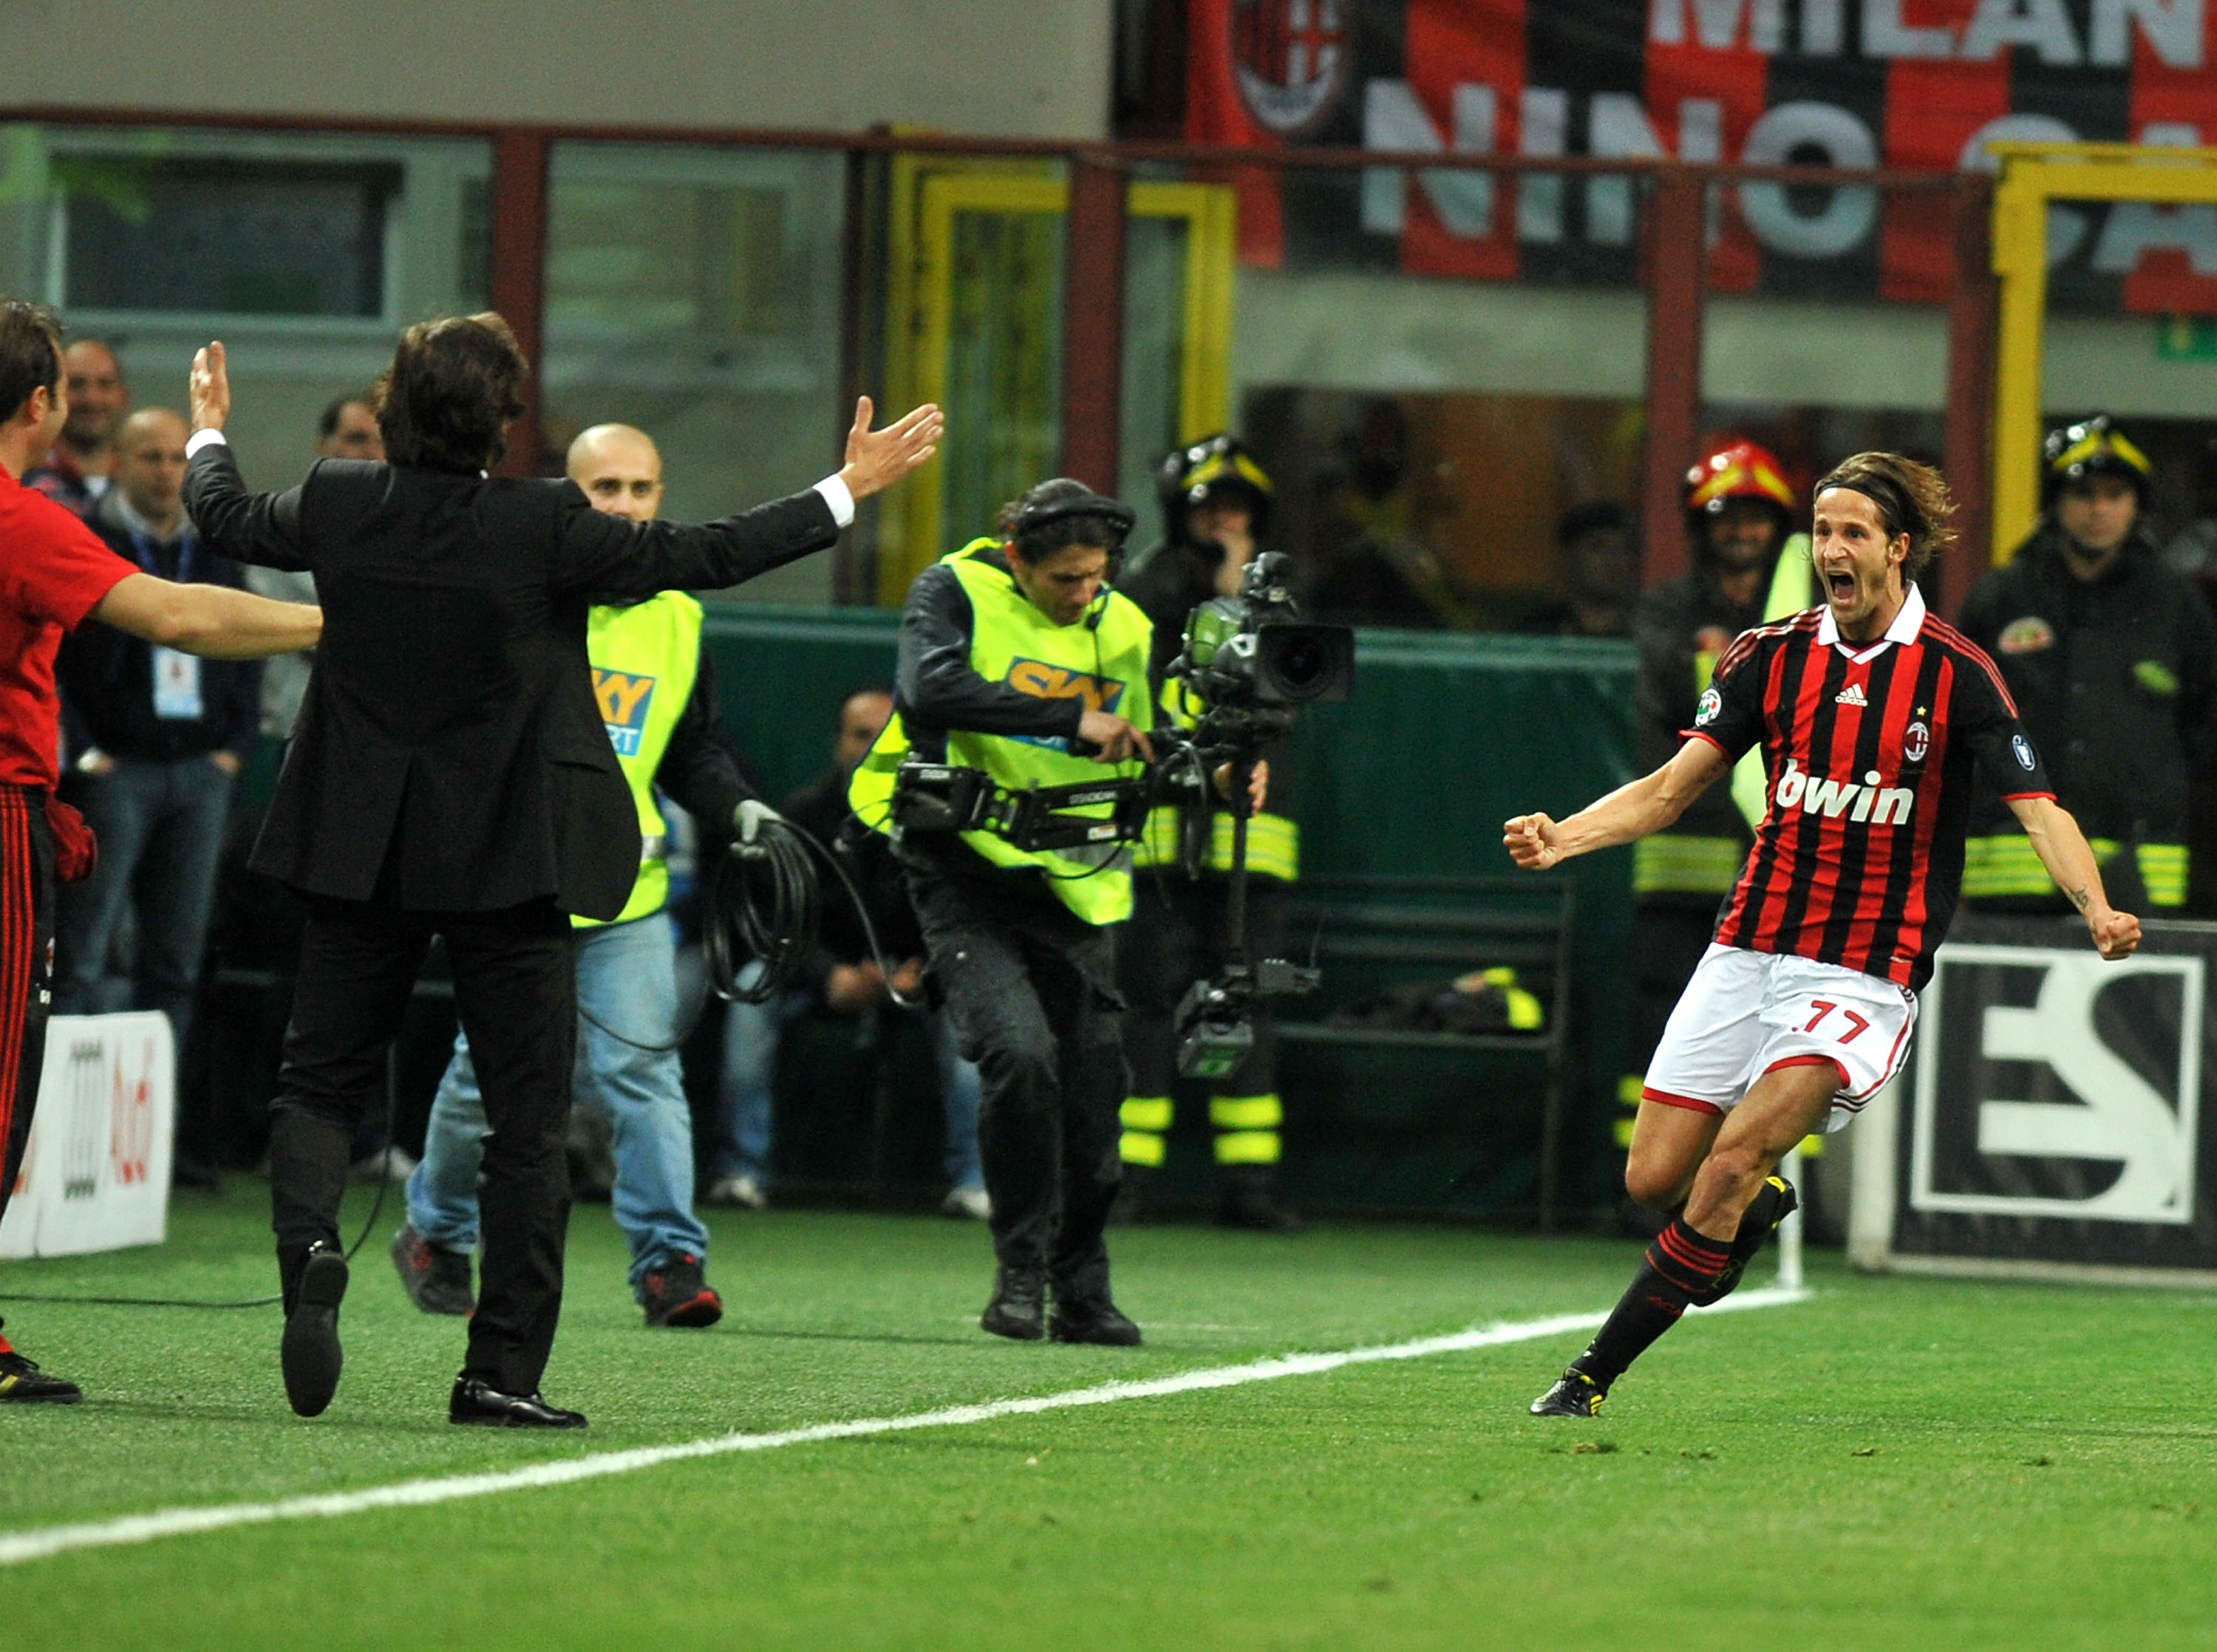 Grand Finale: Antonini celebrates his only goal of 2009/2010 in a 3-0 thrashing of Juventus in May.